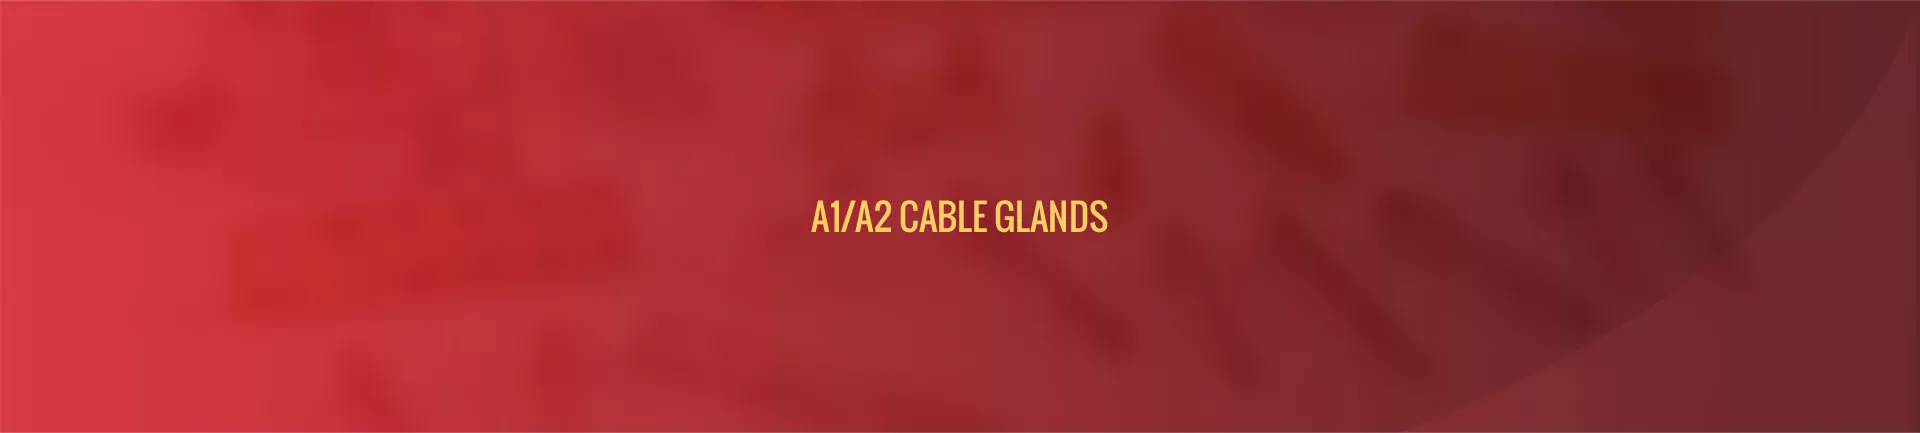 a1-a2-cable-glands-banner